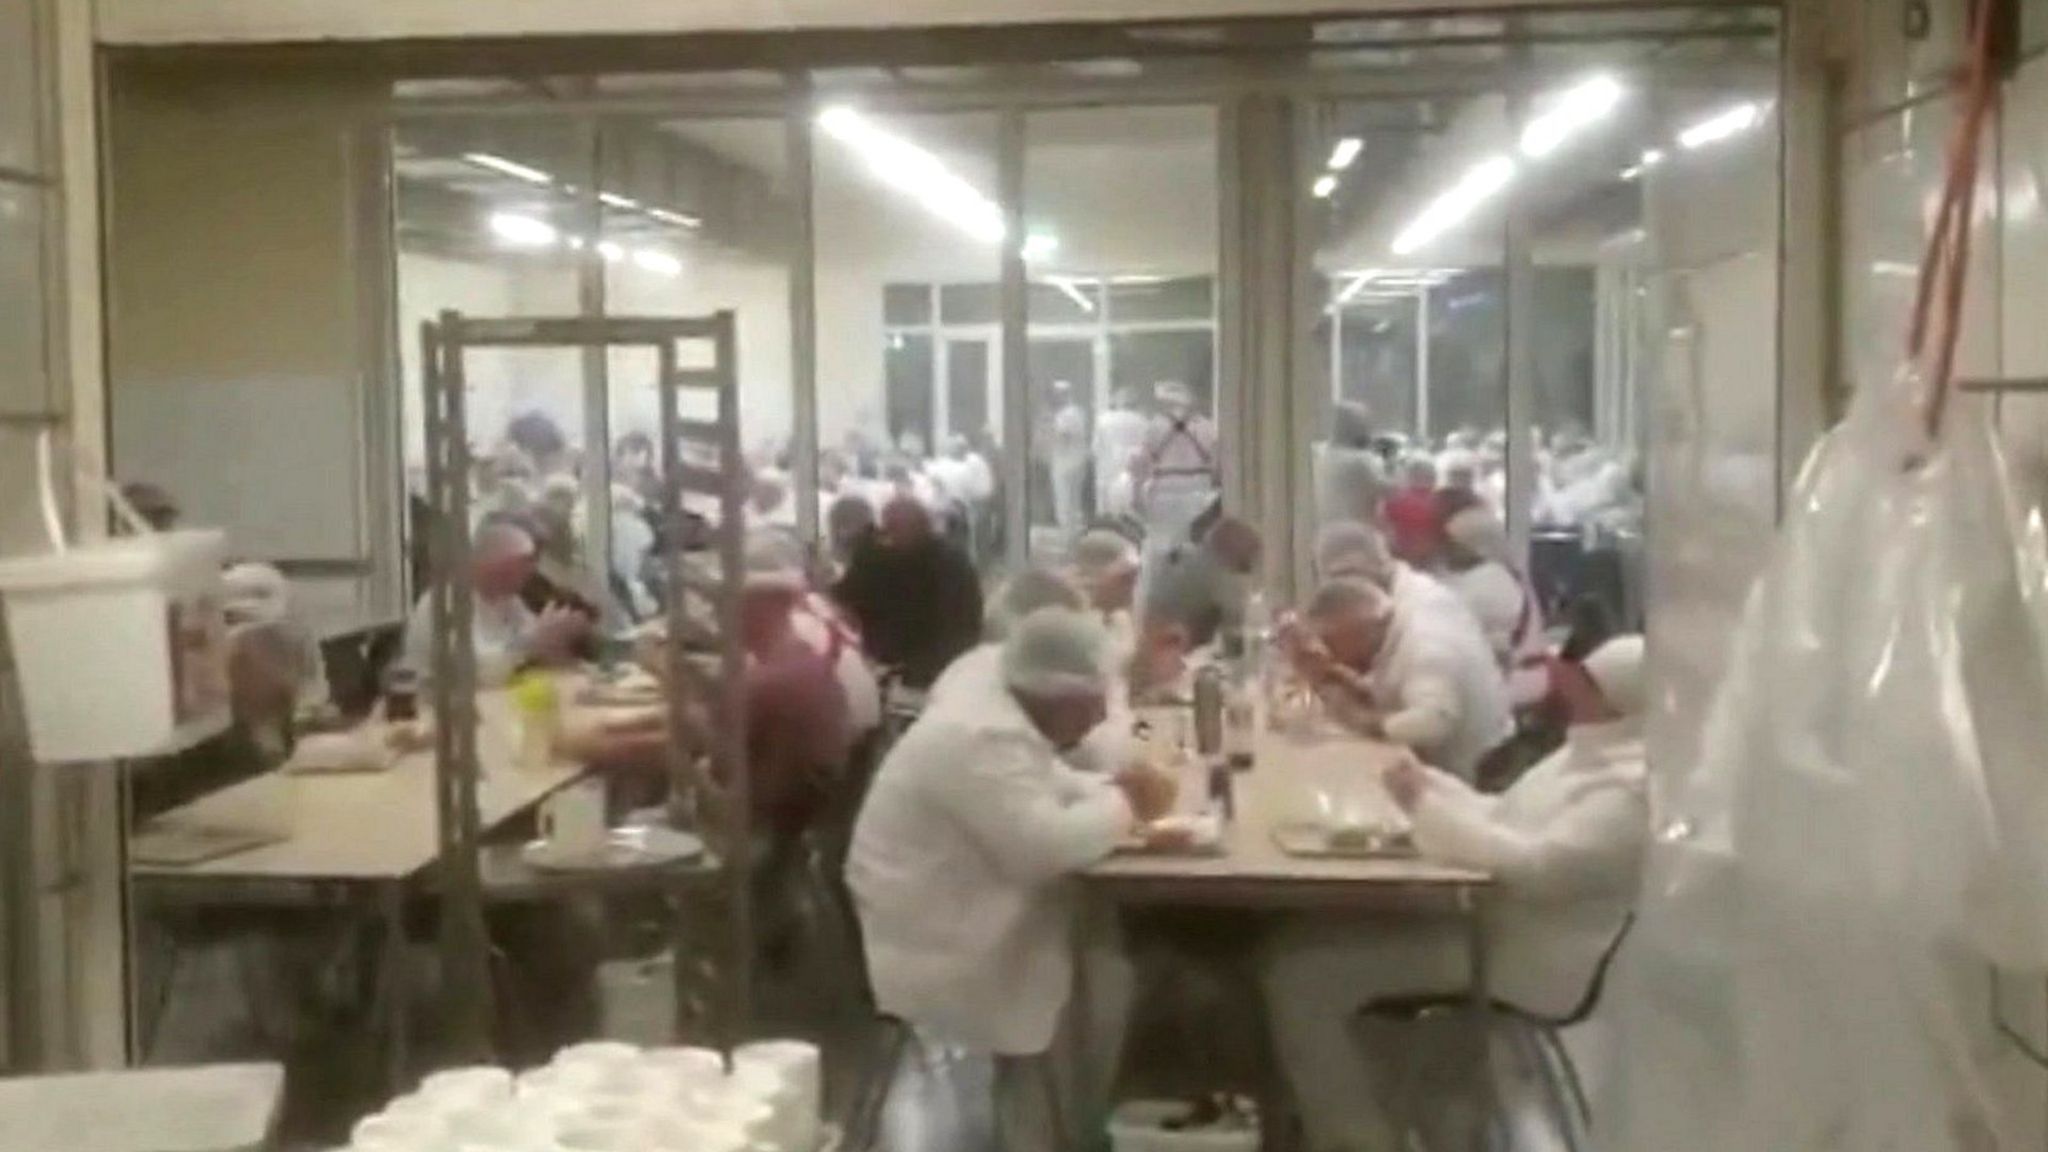 Footage from inside the canteen shows workers sitting together without social distancing